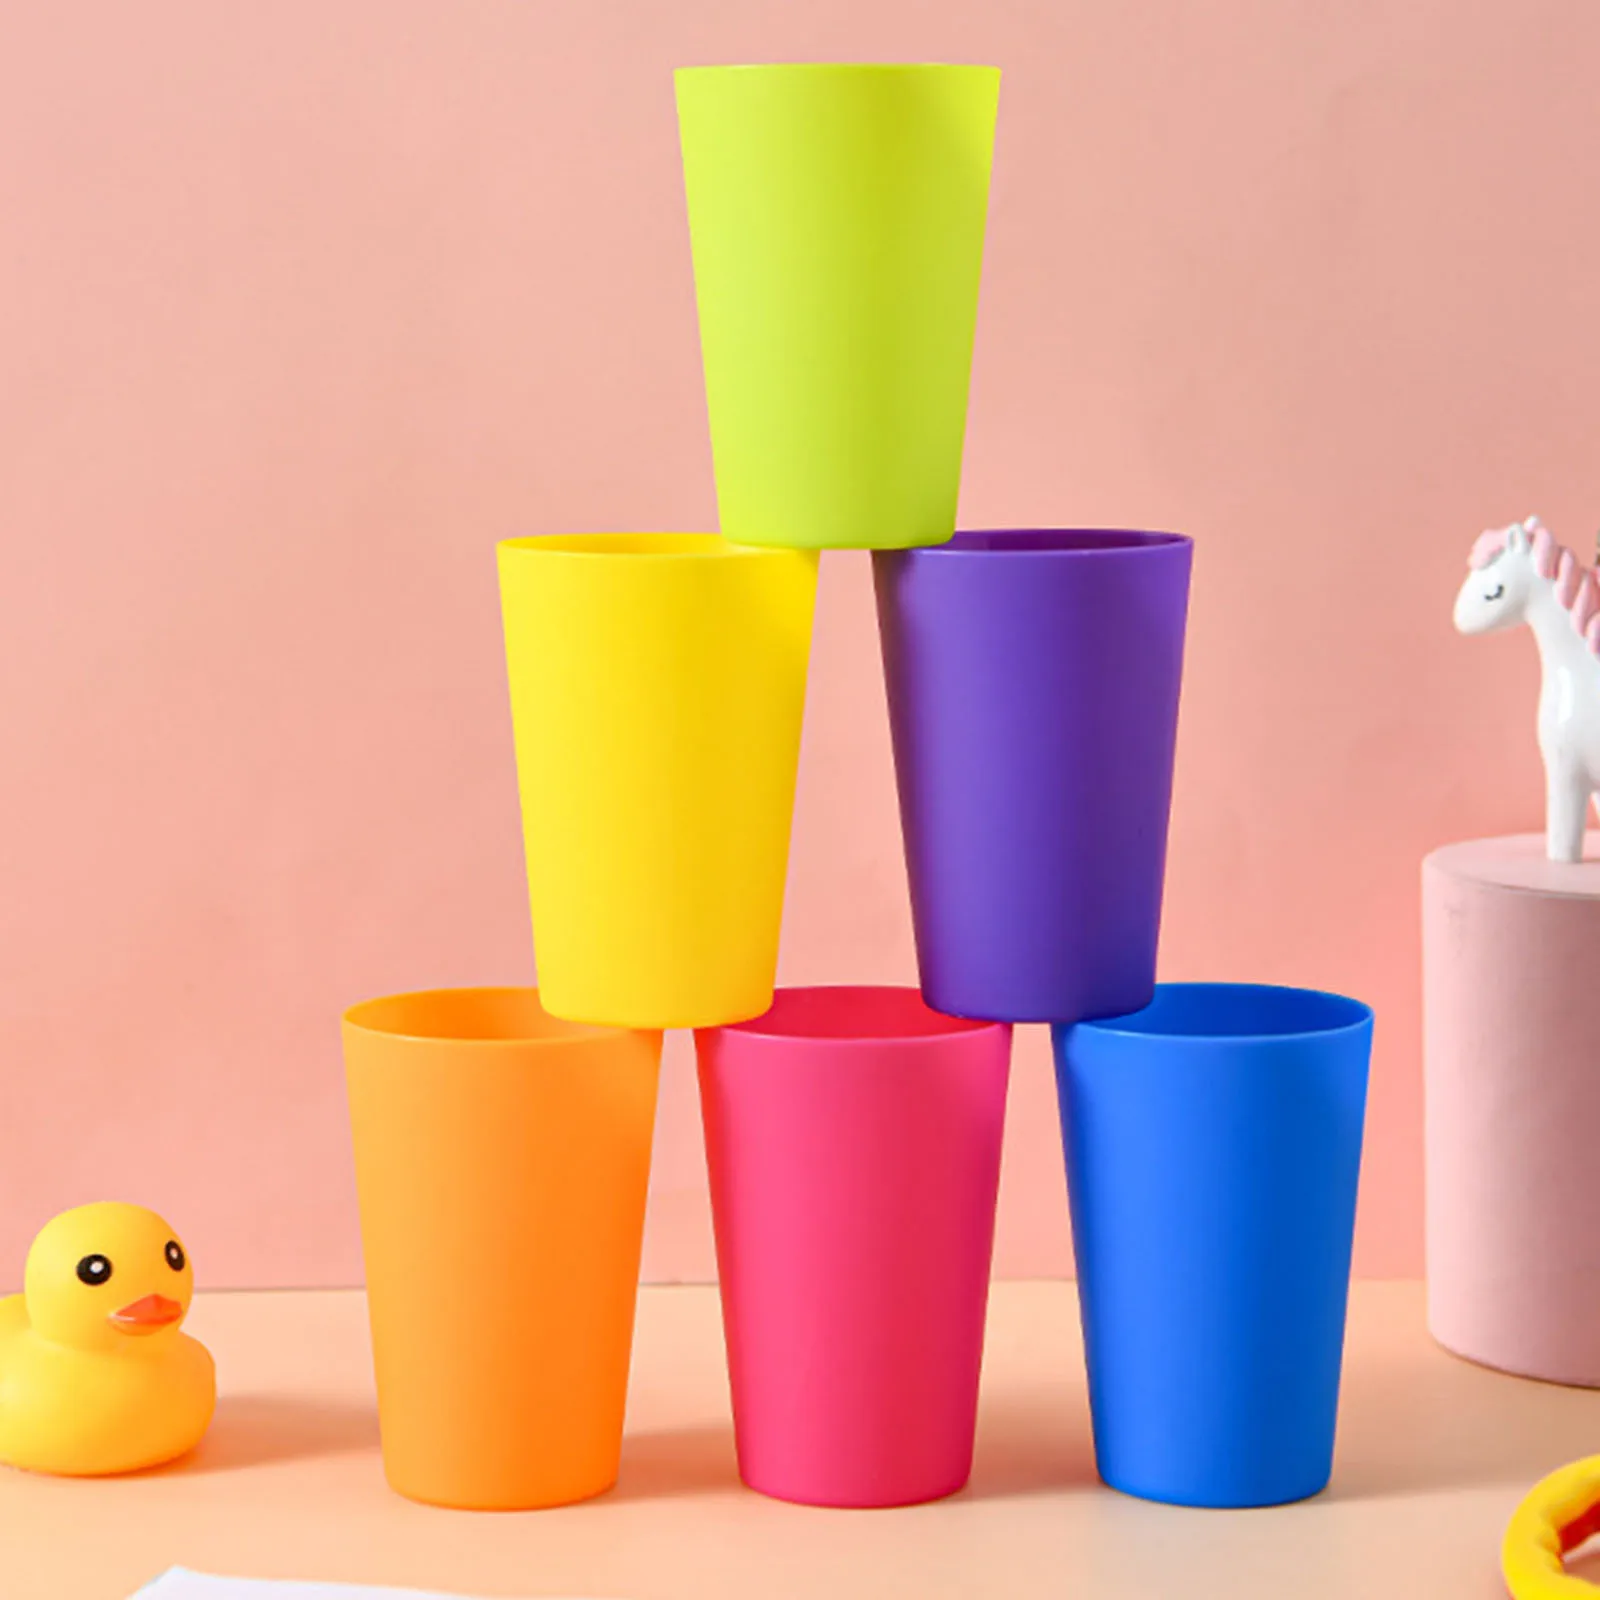 https://ae01.alicdn.com/kf/S3f33df4f3d9c426b87ba2cffeaf4bc91b/6pc-Colourful-Plastic-Cups-Reusable-Eco-Friendly-Drinking-Cup-Stackable-Water-Coffee-Juice-Beverage-Mugs-Picnic.jpeg